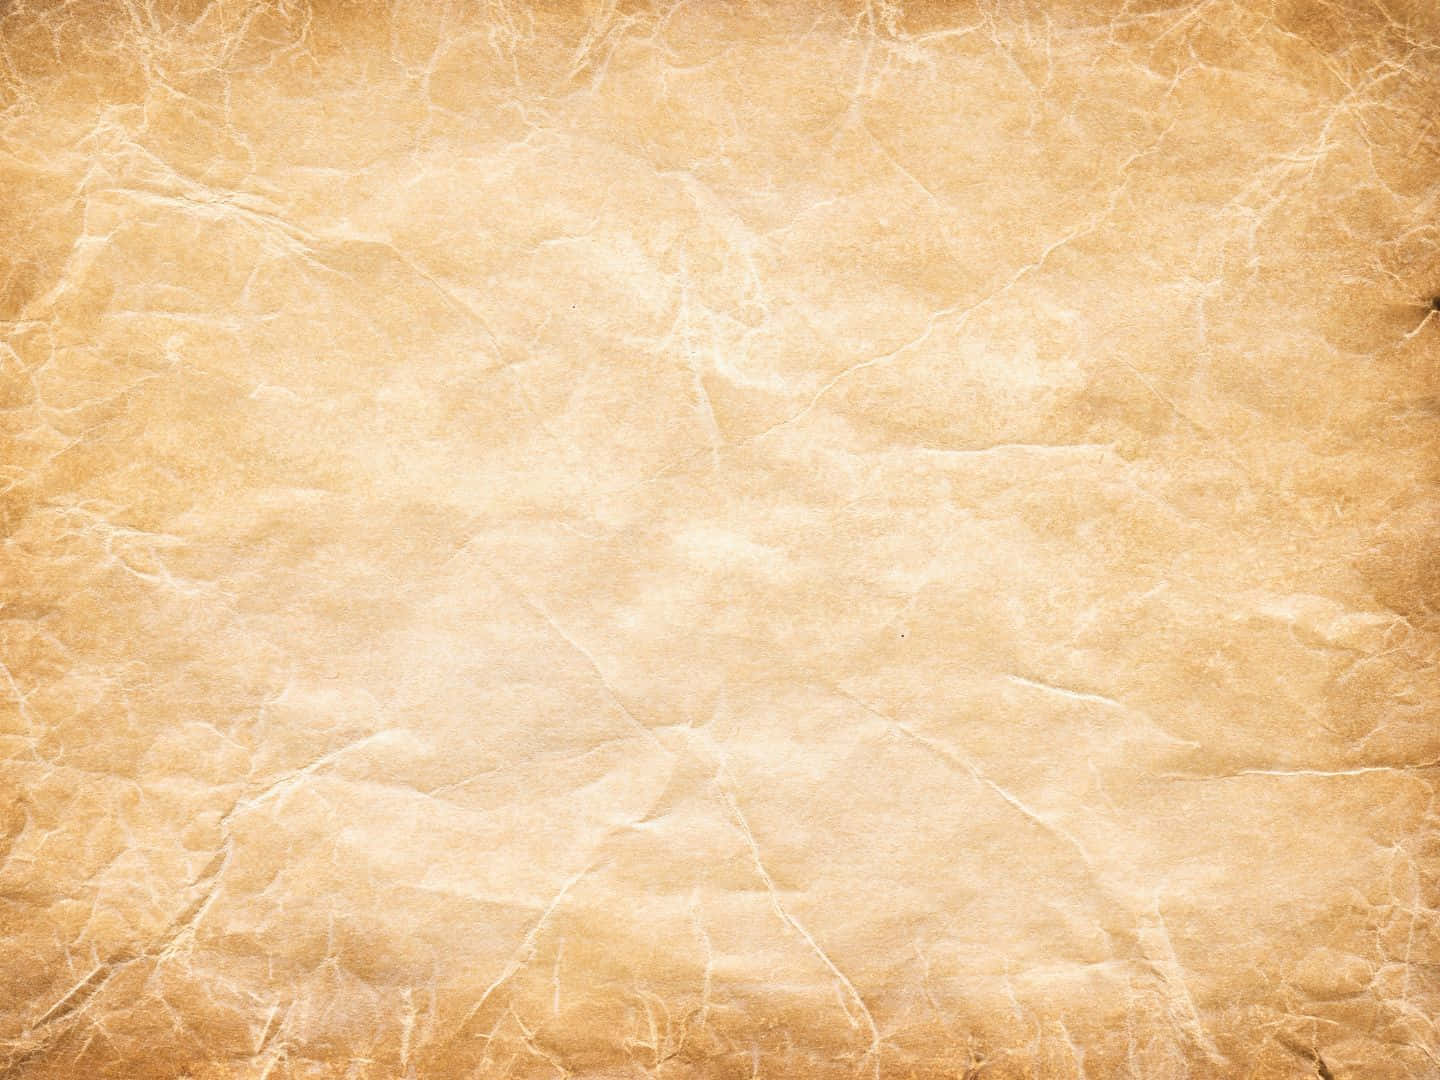 Parchment Background With Pronounced Creases